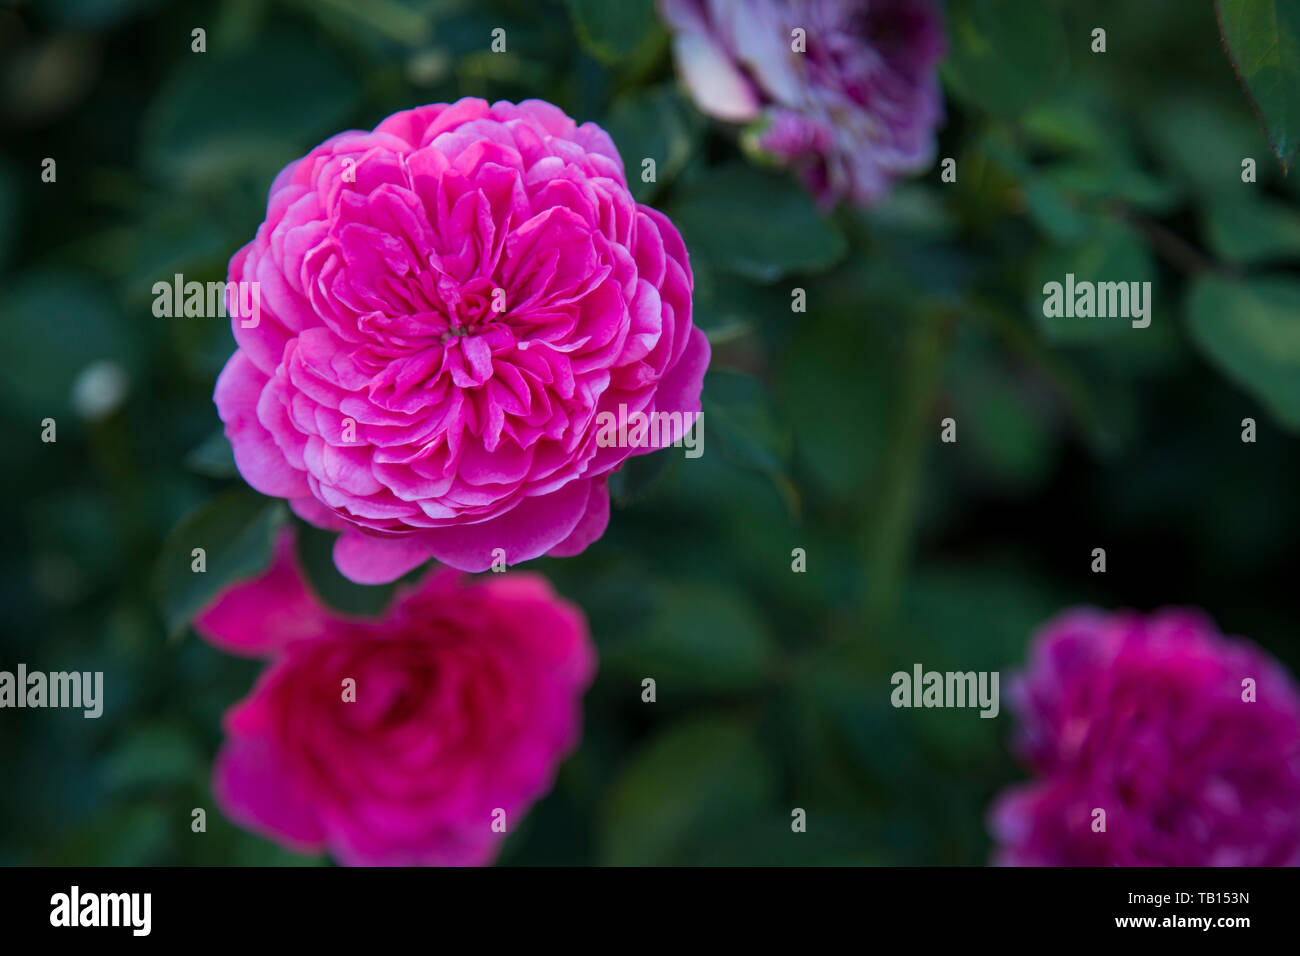 Closeup of dark pink rose on bush, with other roses out of focus in background. Stock Photo